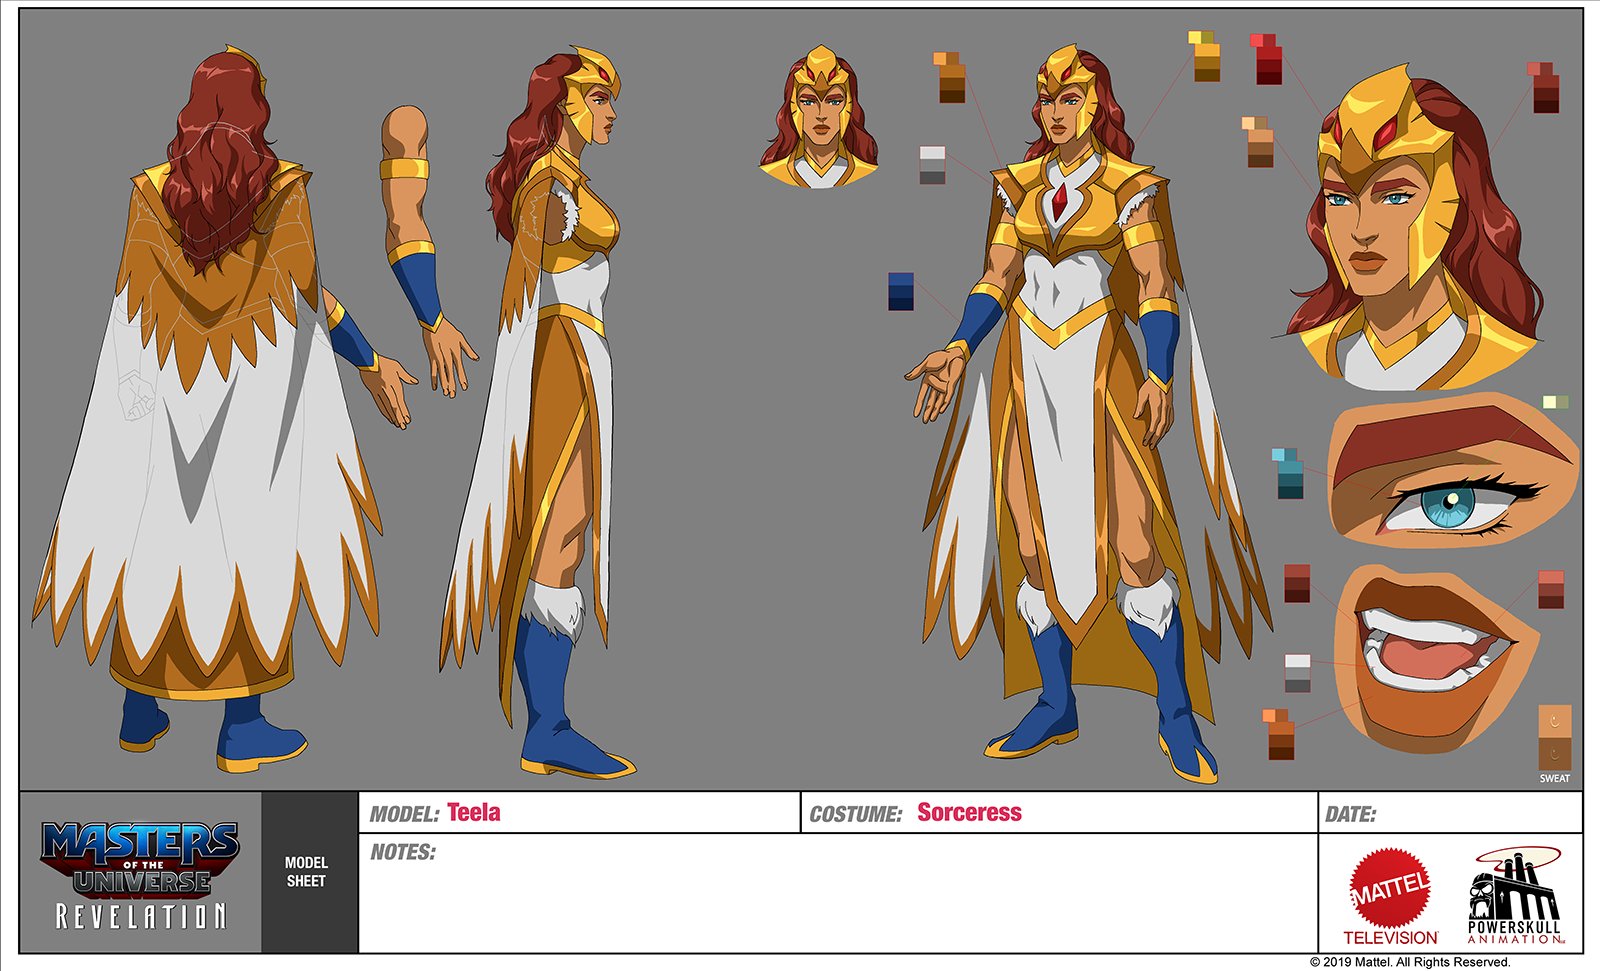 Powerhouse Animation reveals design models for Sorceress Teela and Man At Arms Andra today.